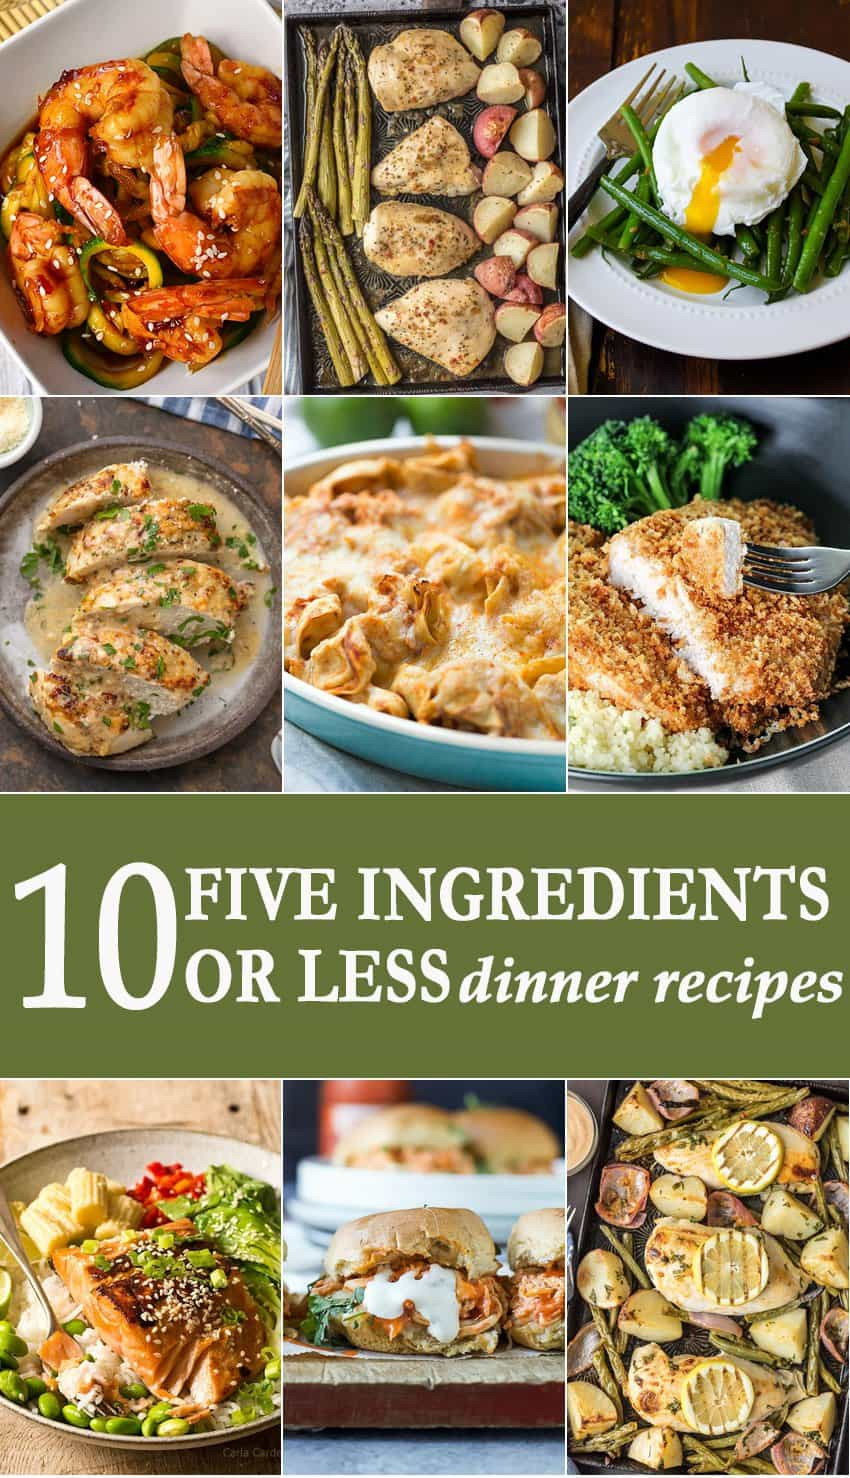 5 Ingredient Dinner Recipes
 10 Five Ingre nts or Less Dinners recipequicks